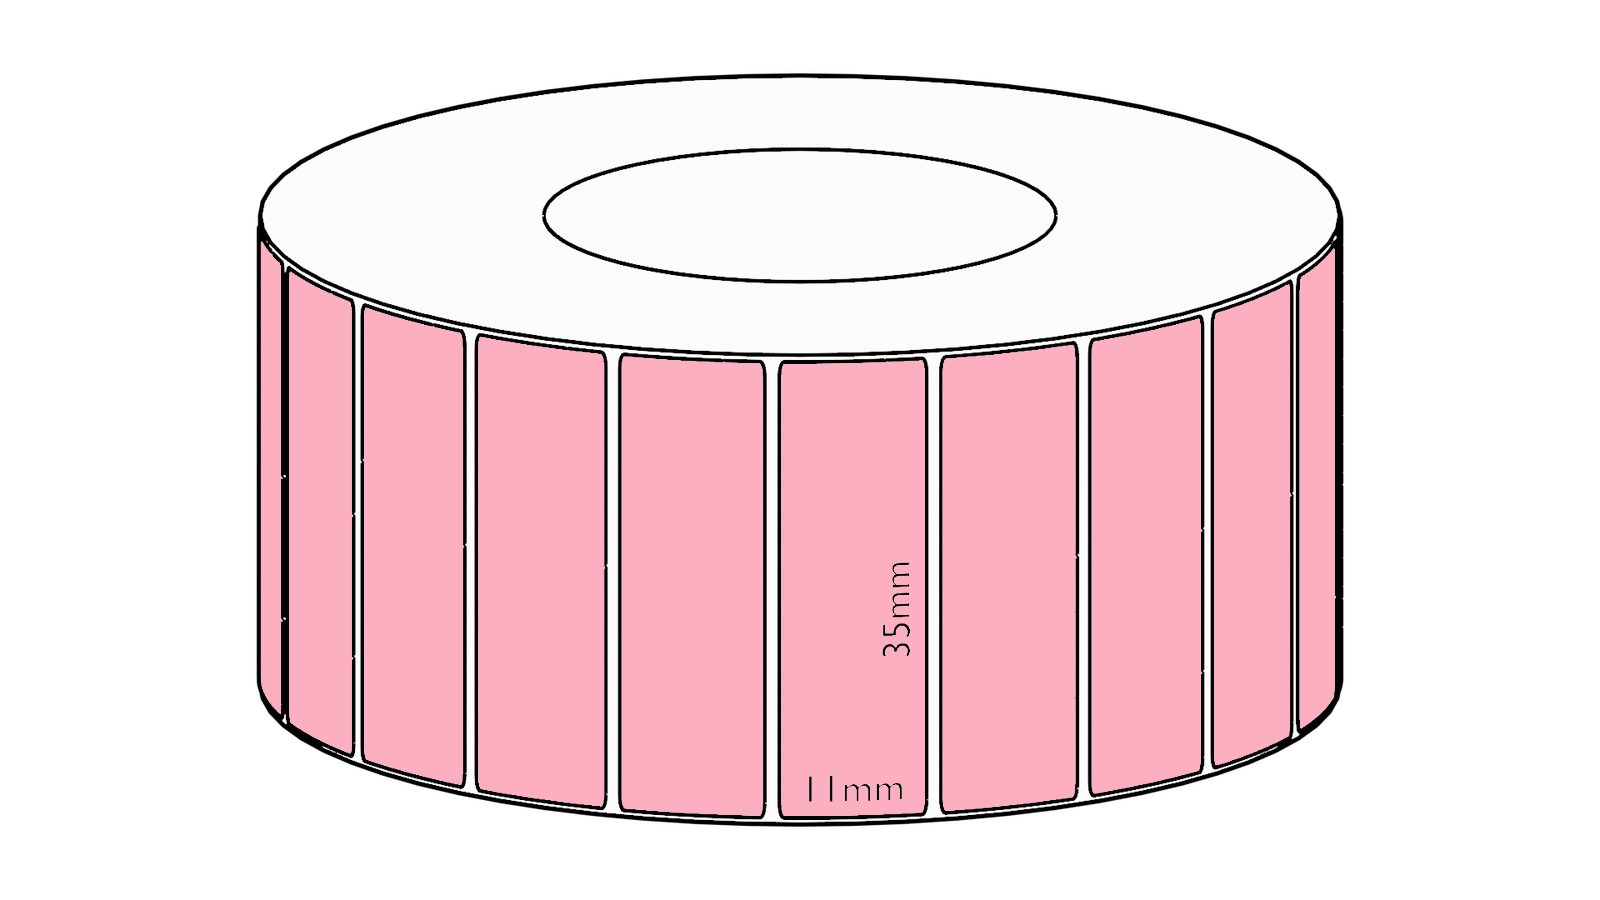 35x11mm Pink Direct Thermal Permanent Label, 3550 per roll, 38mm core